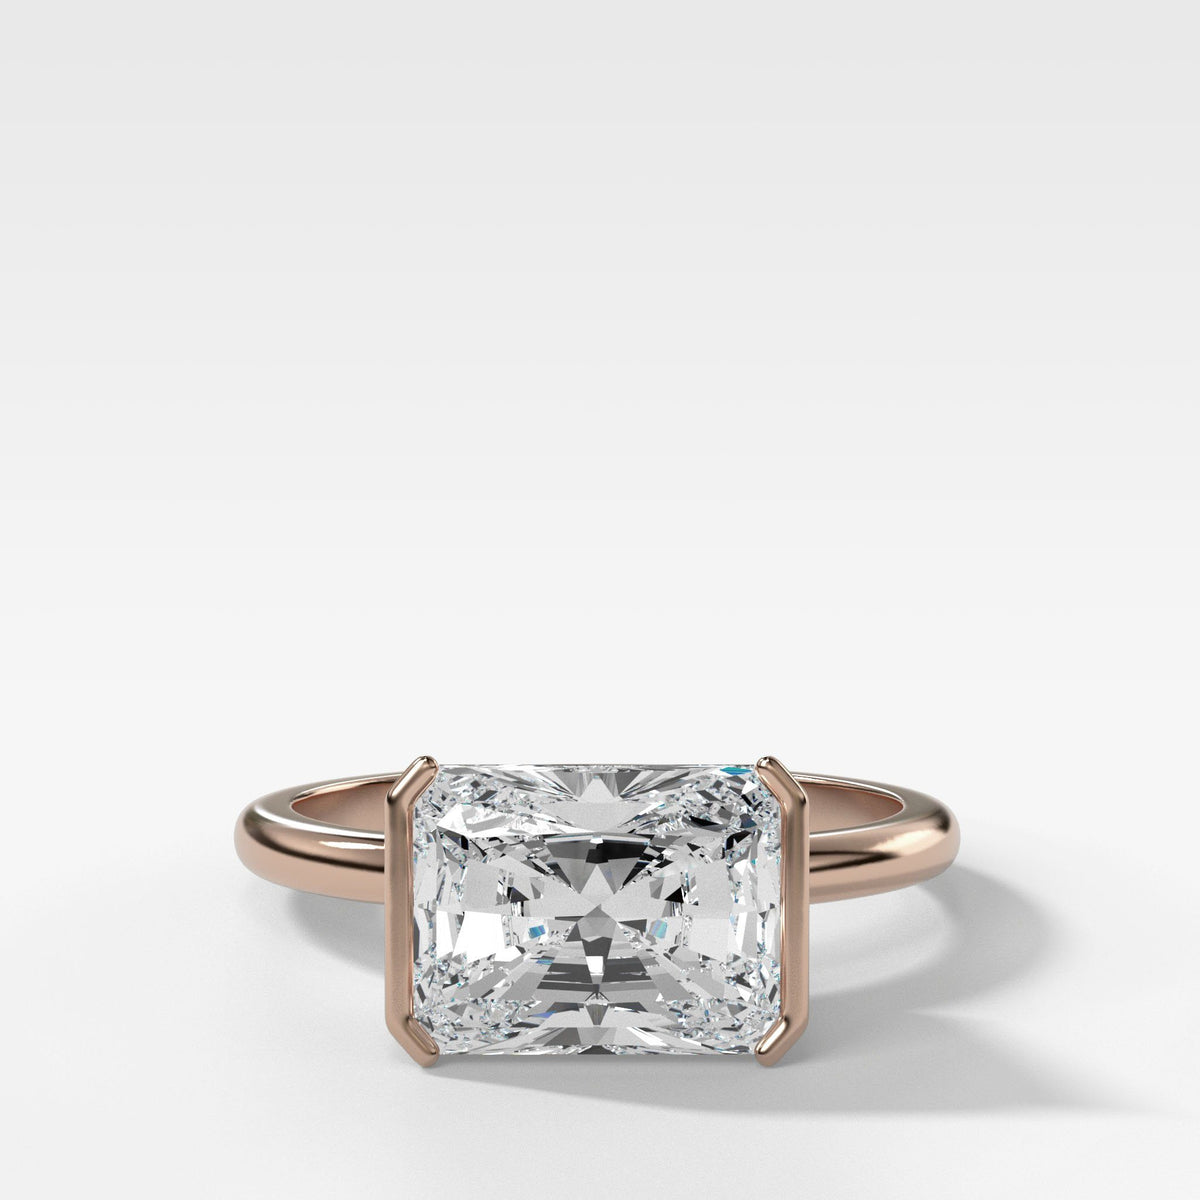 Half Bezel Solitaire Engagement ring with Elongated Radiant Cut by Good Stone in Rose Gold